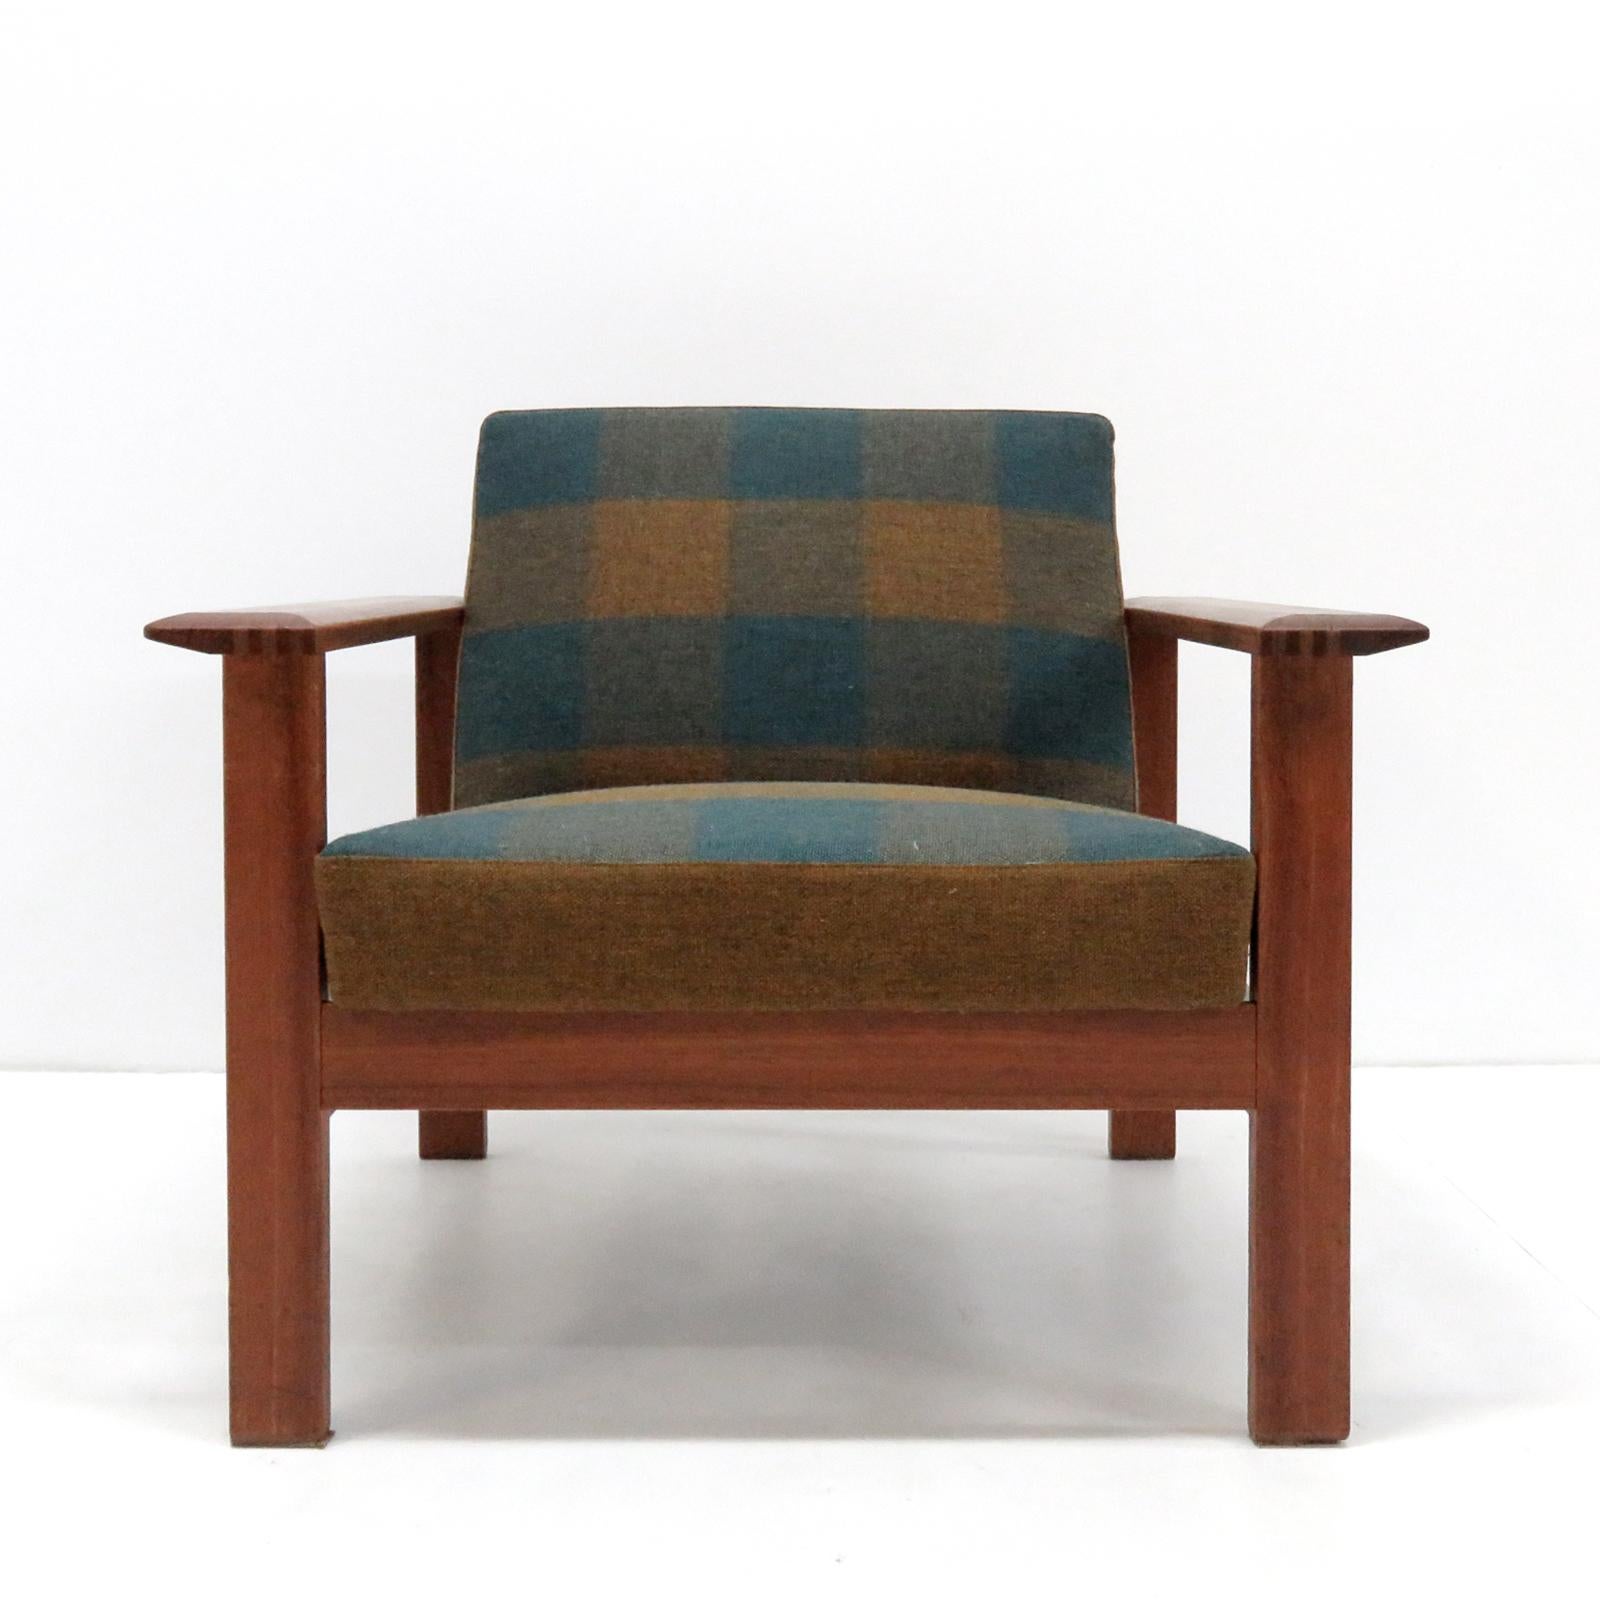 Bold and comfortable Danish modern lounge chairs by Gerhard Berg for Stokke, Norway, 1960s, oversized teak frames with original multicolored tartan fabric in green-blue hues.